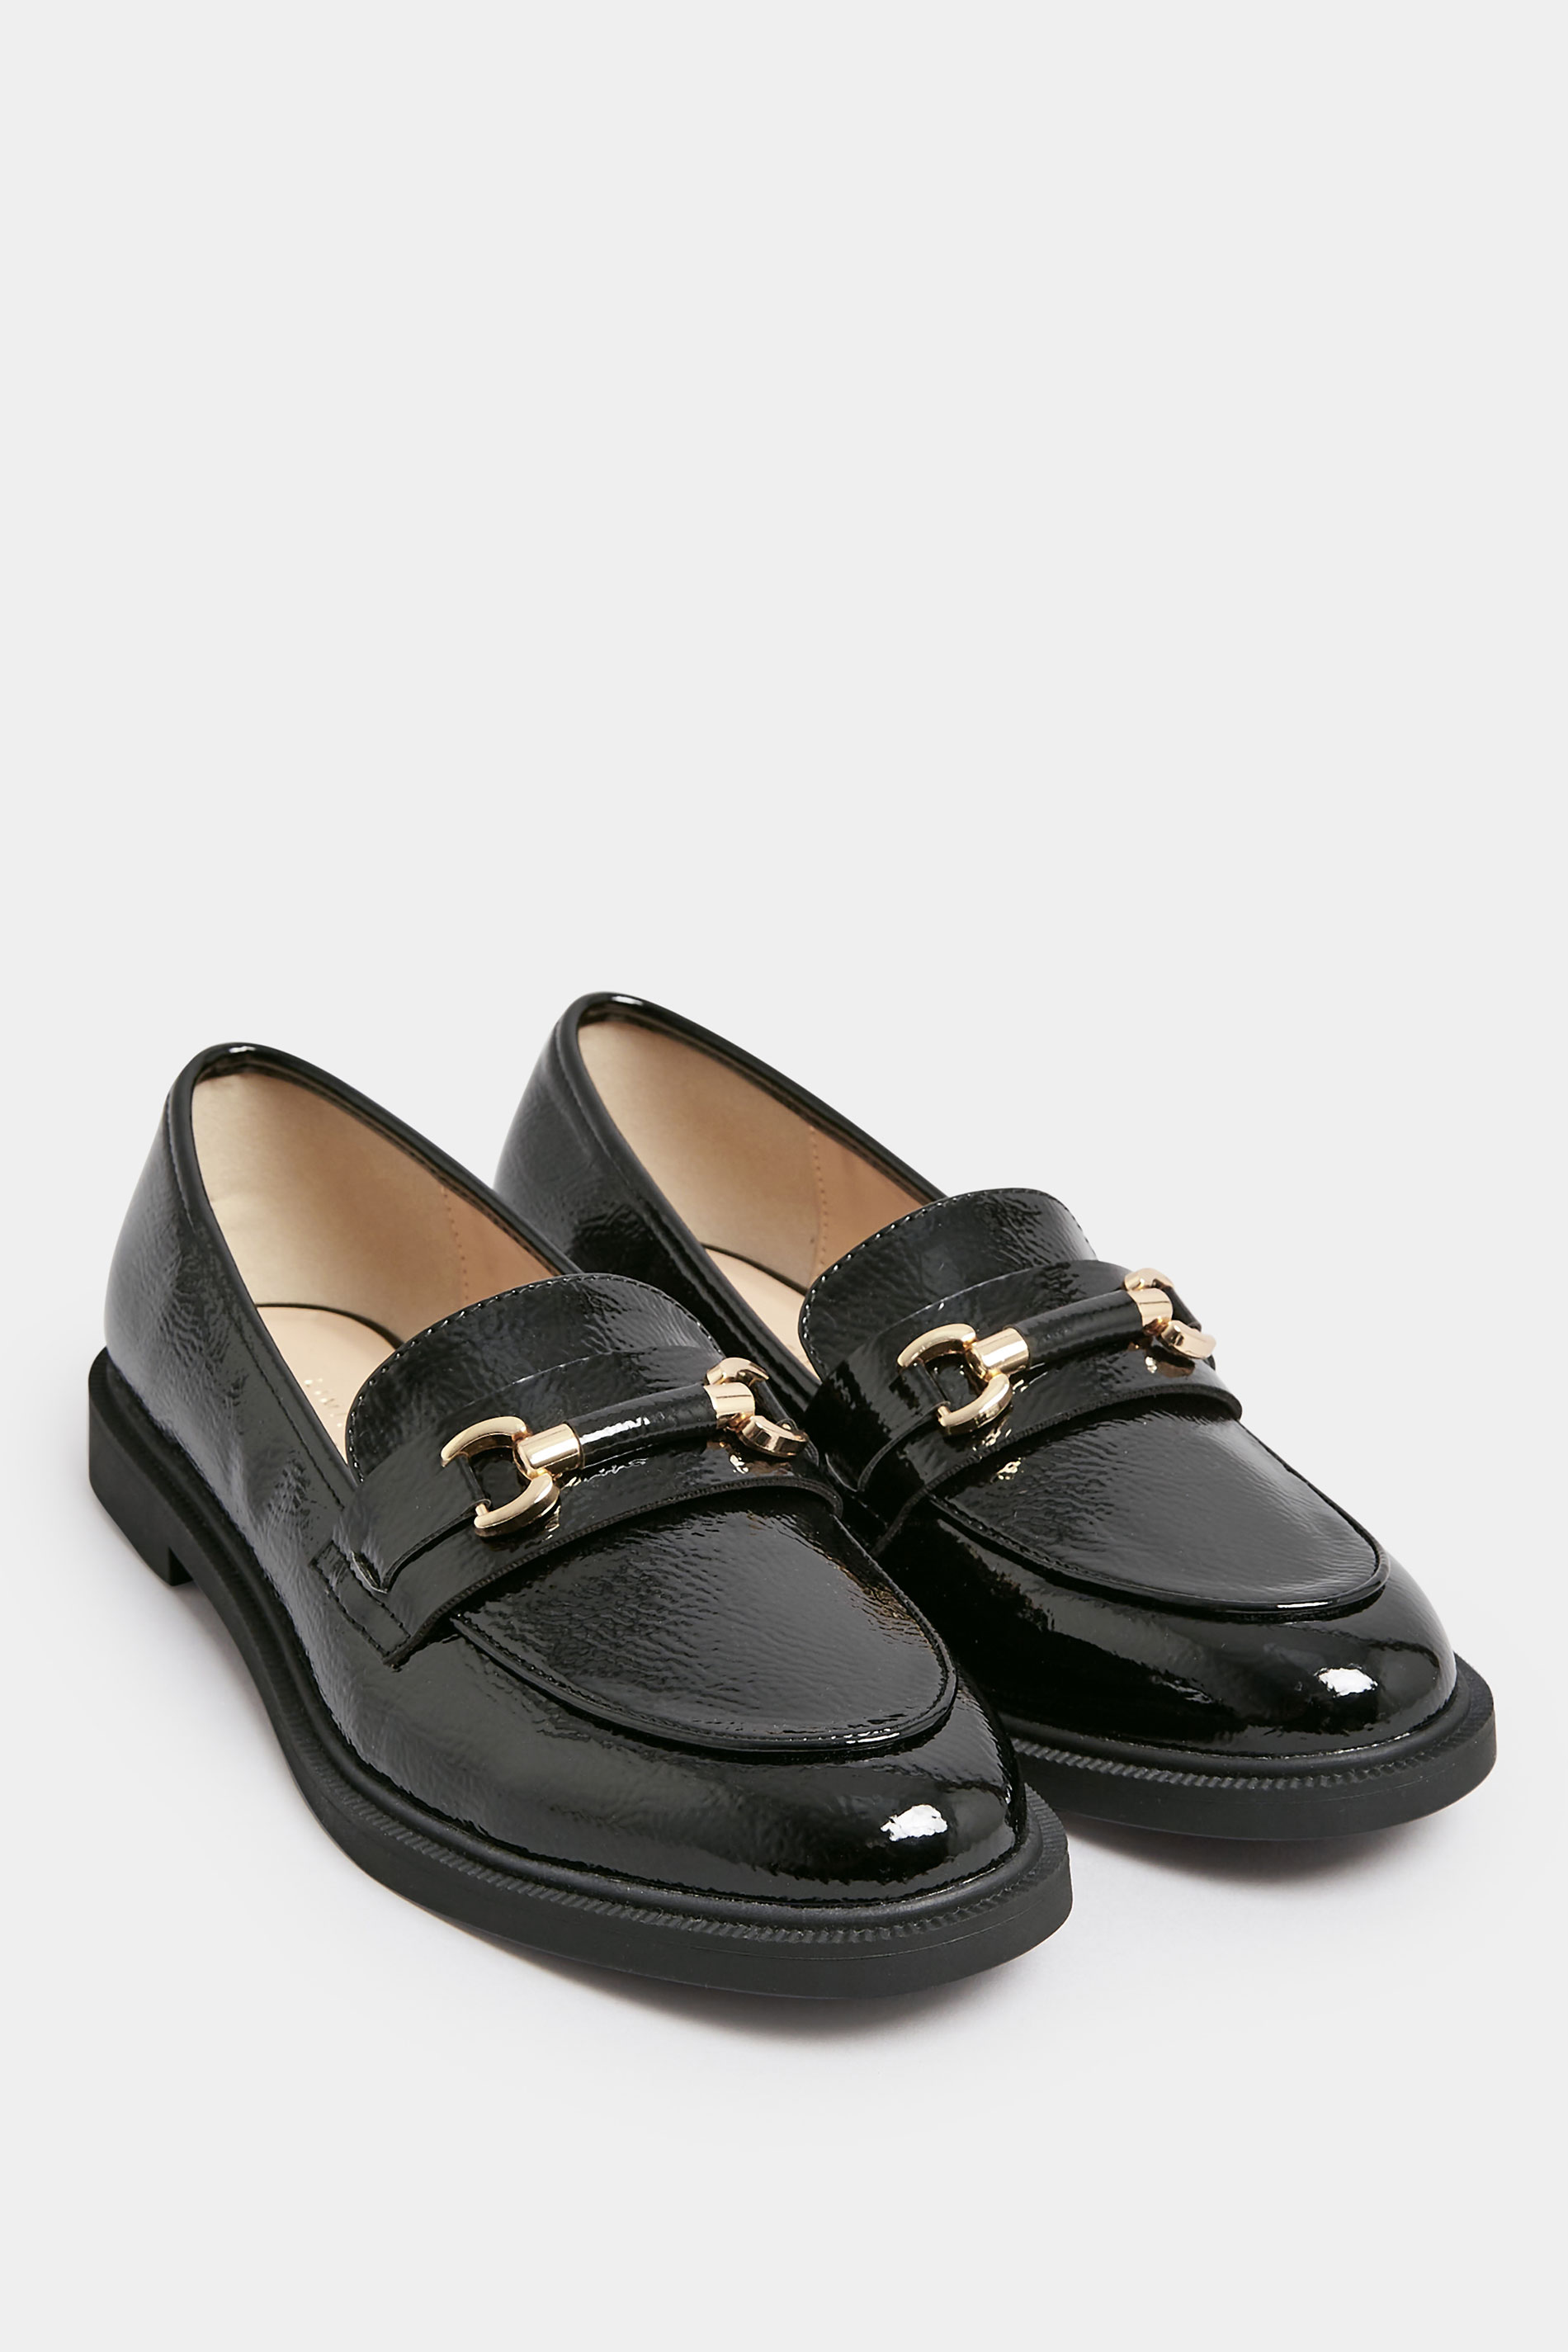 Black Patent Chain Detail Loafer In Wide E Fit & Extra Wide EEE Fit | Yours Clothing 2